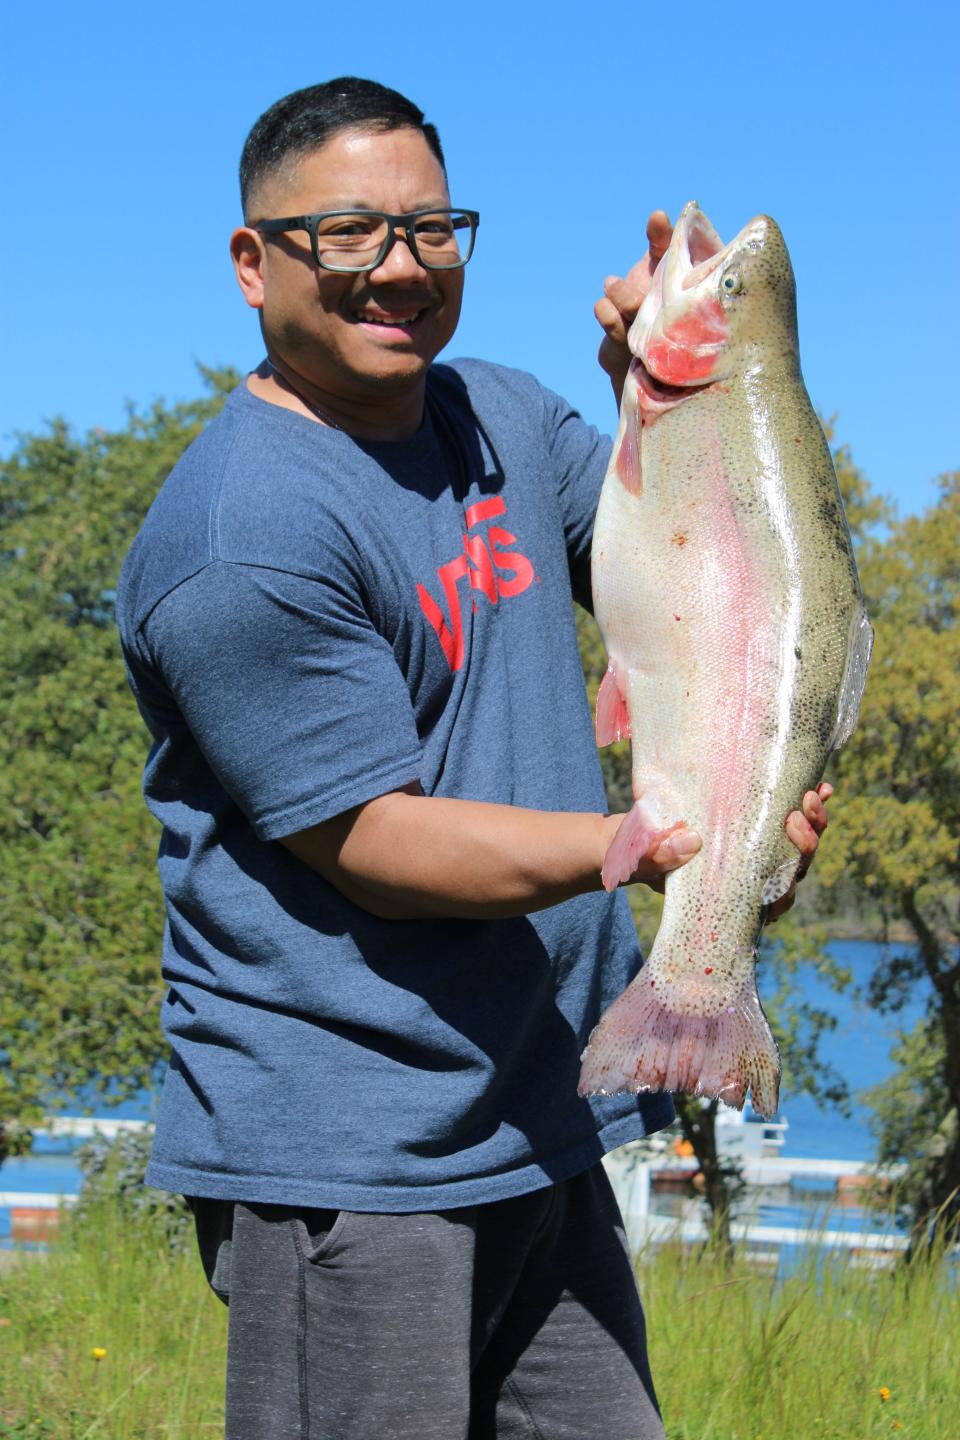 Daniel De Leon won first place in the adult division of the NorCal Trout Angler’s Challenge at Lake Amador on March 16 with this 11.64 lb. trout caught while trolling a Rapala.